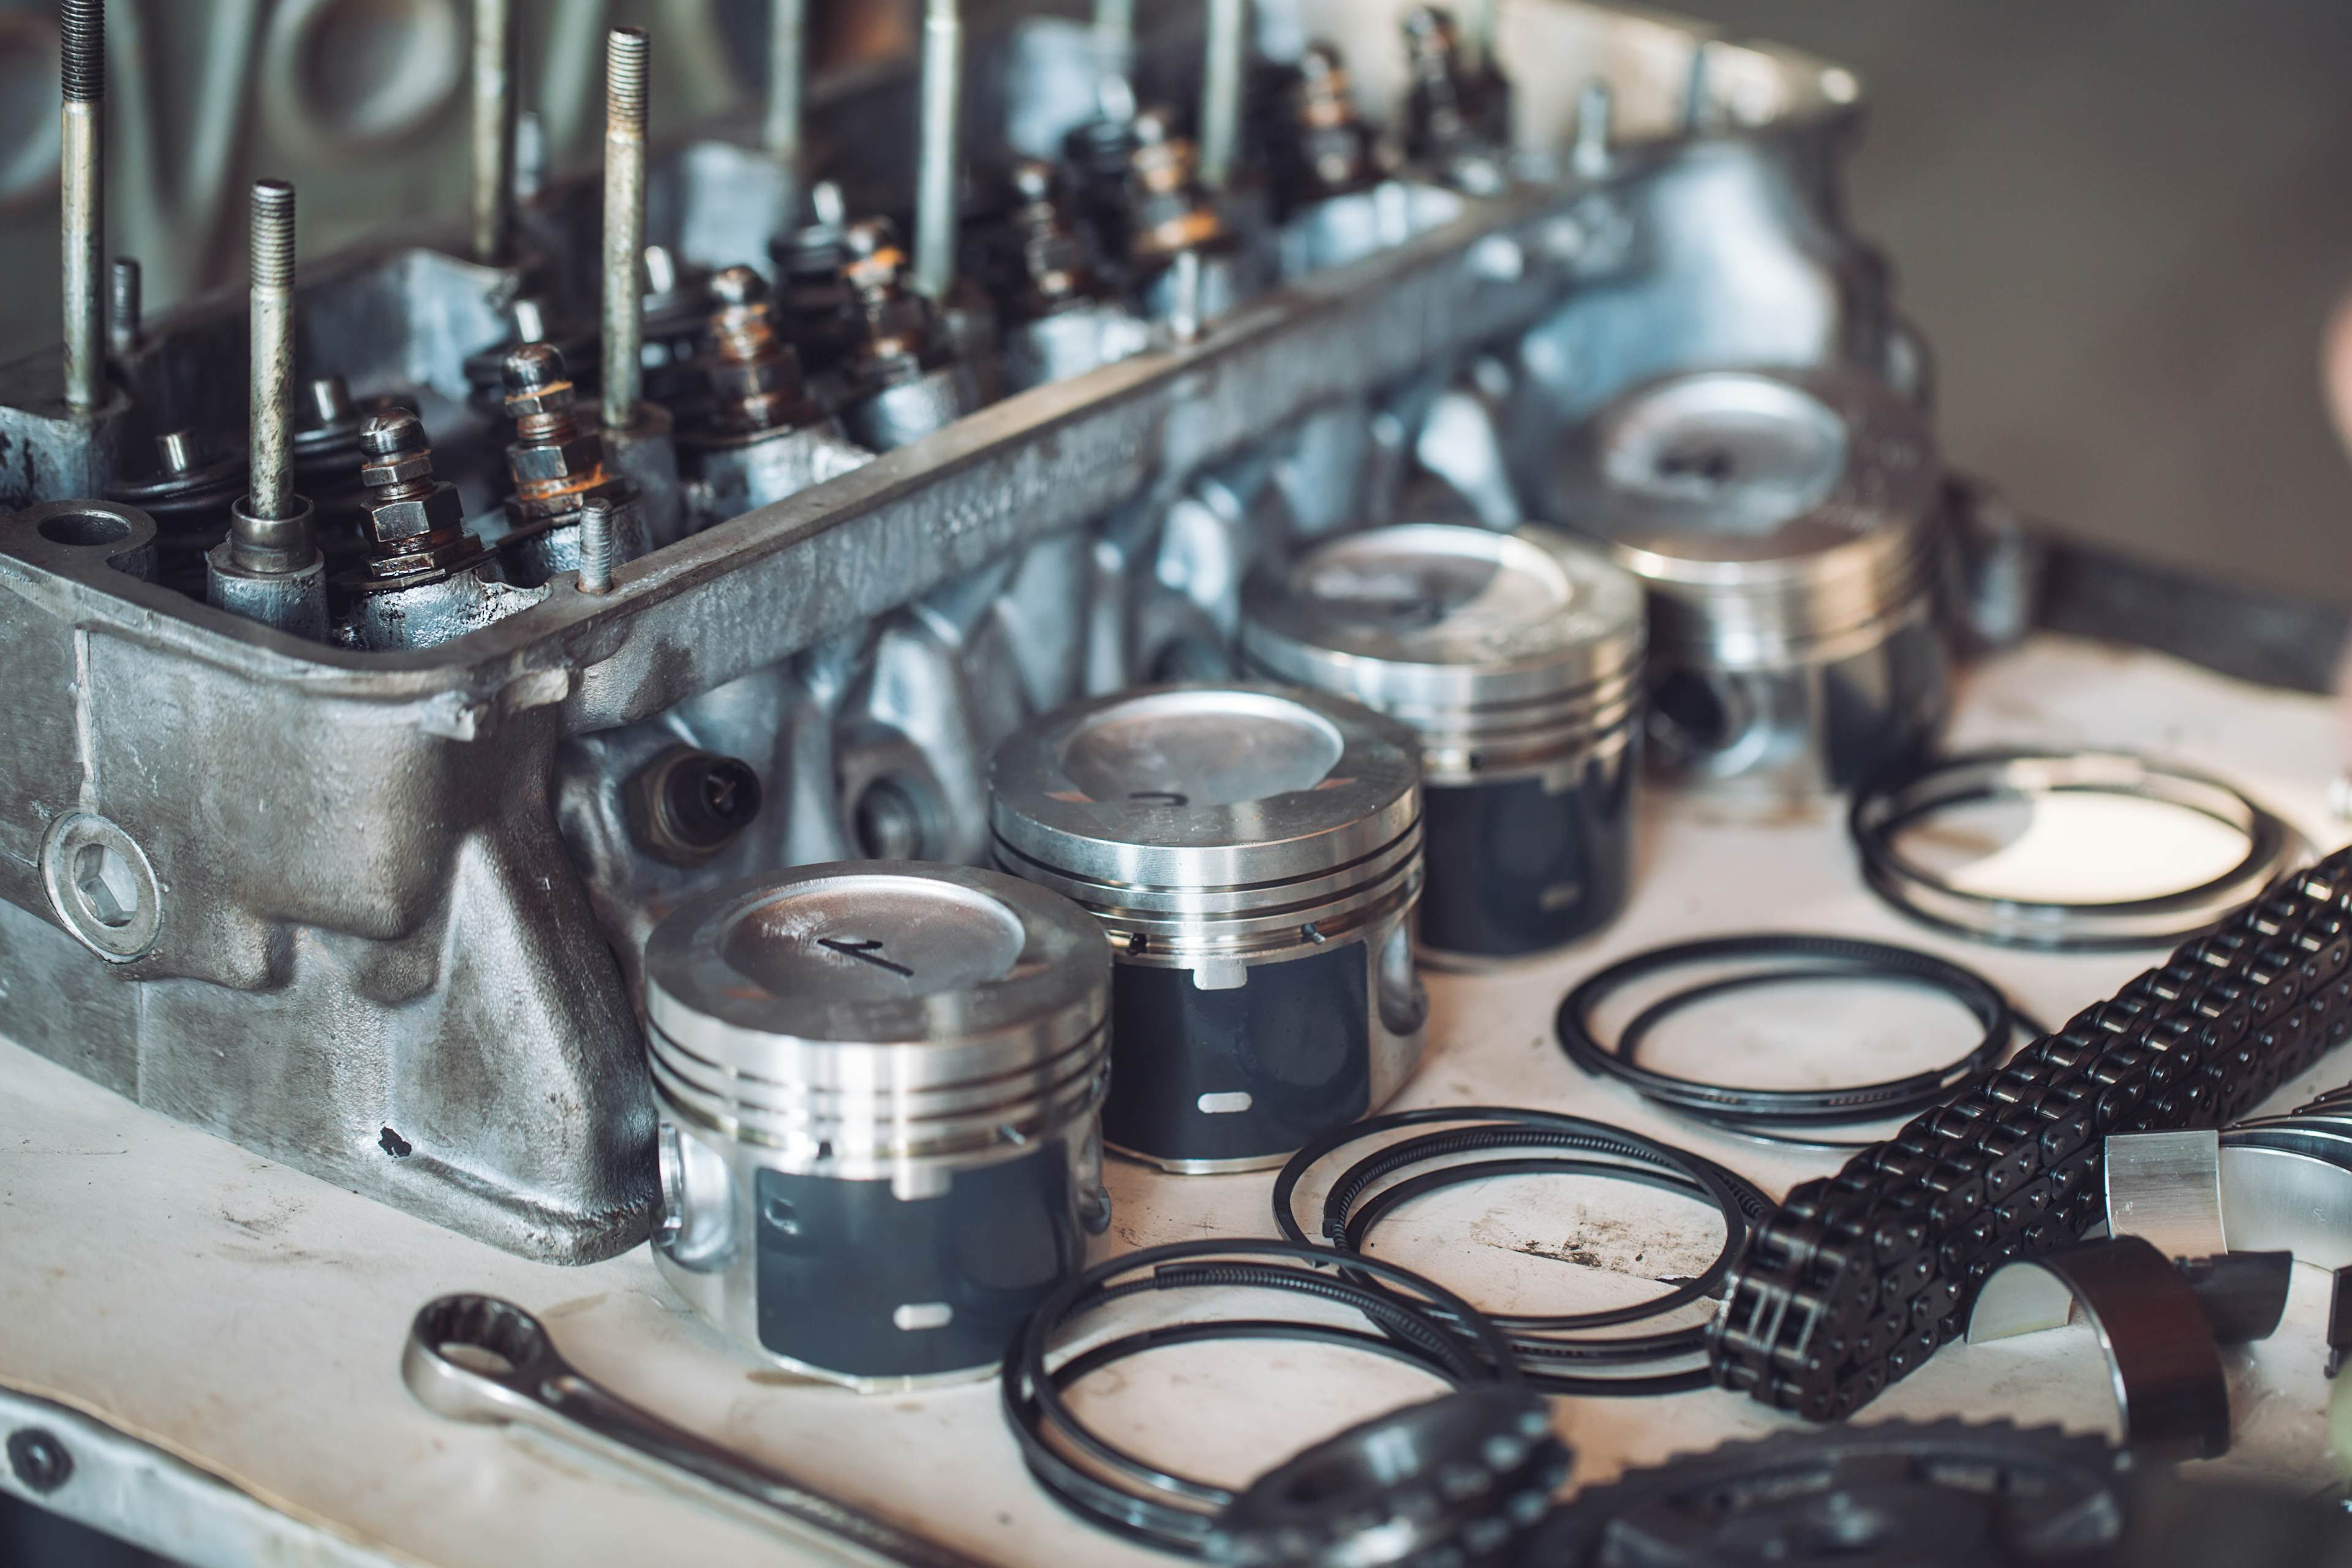 Engine Pistons: How do they work?